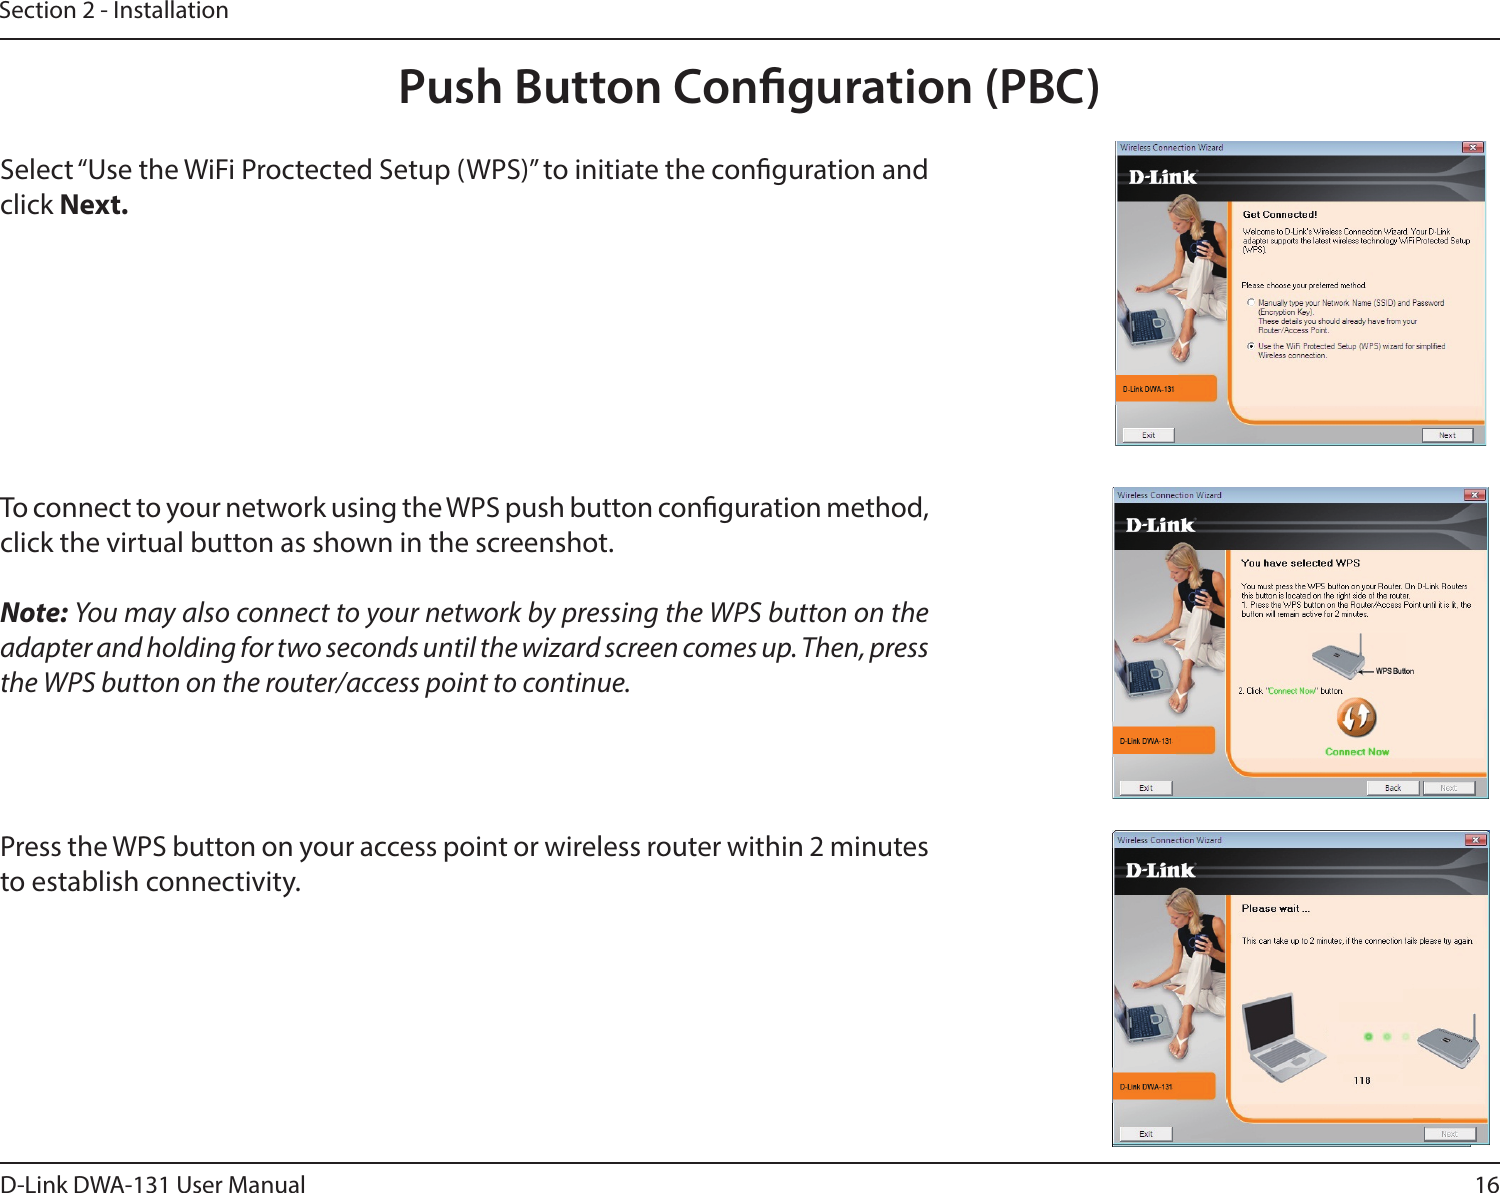 16D-Link DWA-131 User ManualSection 2 - InstallationPush Button Conguration (PBC)To connect to your network using the WPS push button conguration method, click the virtual button as shown in the screenshot. Note: You may also connect to your network by pressing the WPS button on the adapter and holding for two seconds until the wizard screen comes up. Then, press the WPS button on the router/access point to continue.  Press the WPS button on your access point or wireless router within 2 minutes to establish connectivity.  Select “Use the WiFi Proctected Setup (WPS)” to initiate the conguration and click Next.